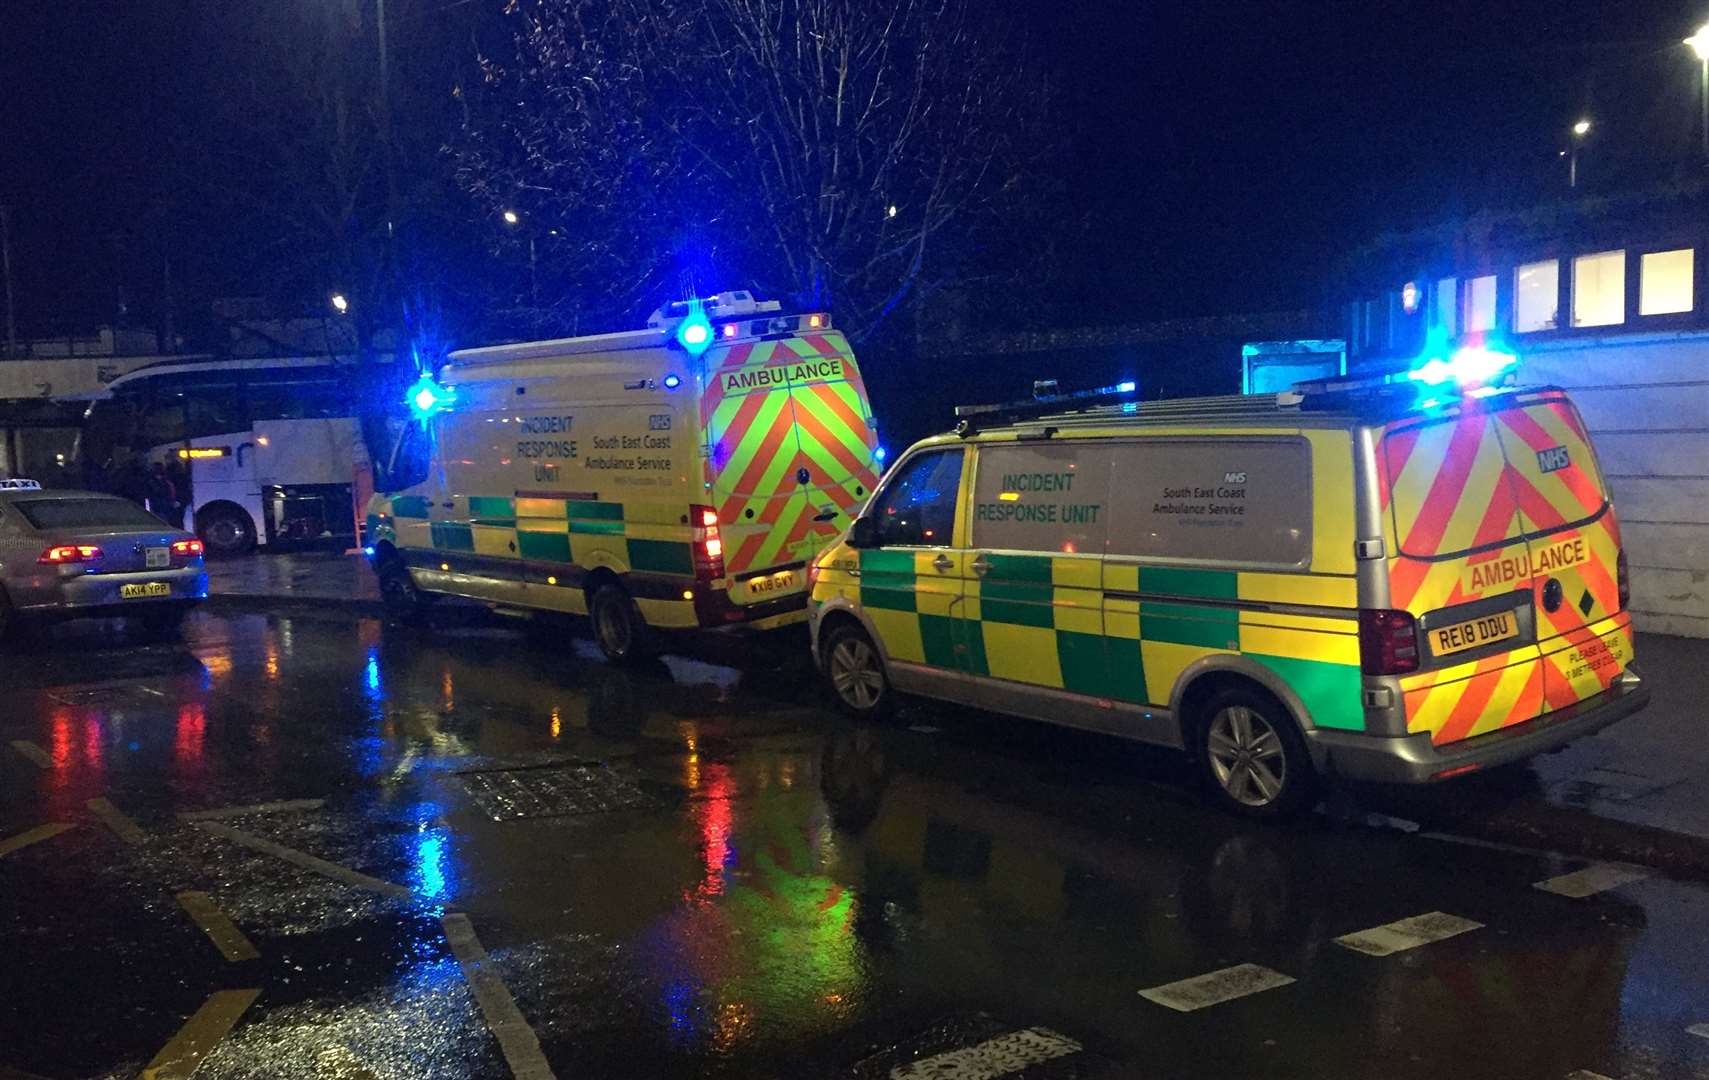 Incident response vehicles at the station